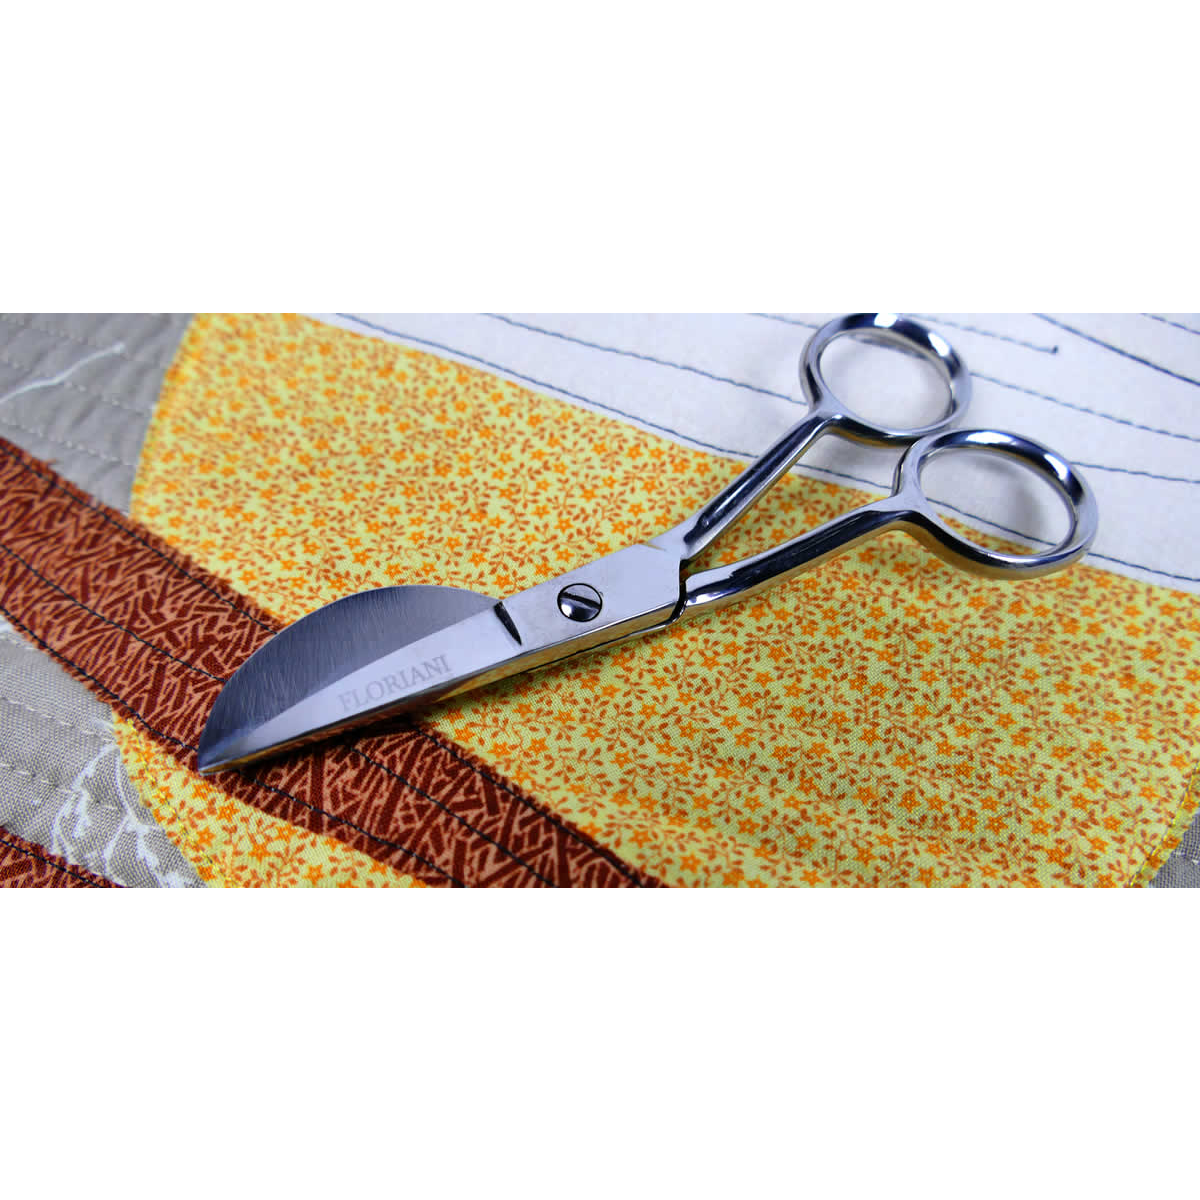 Floriani Applique Plus Scissors for Embroidery - Moore's Sewing